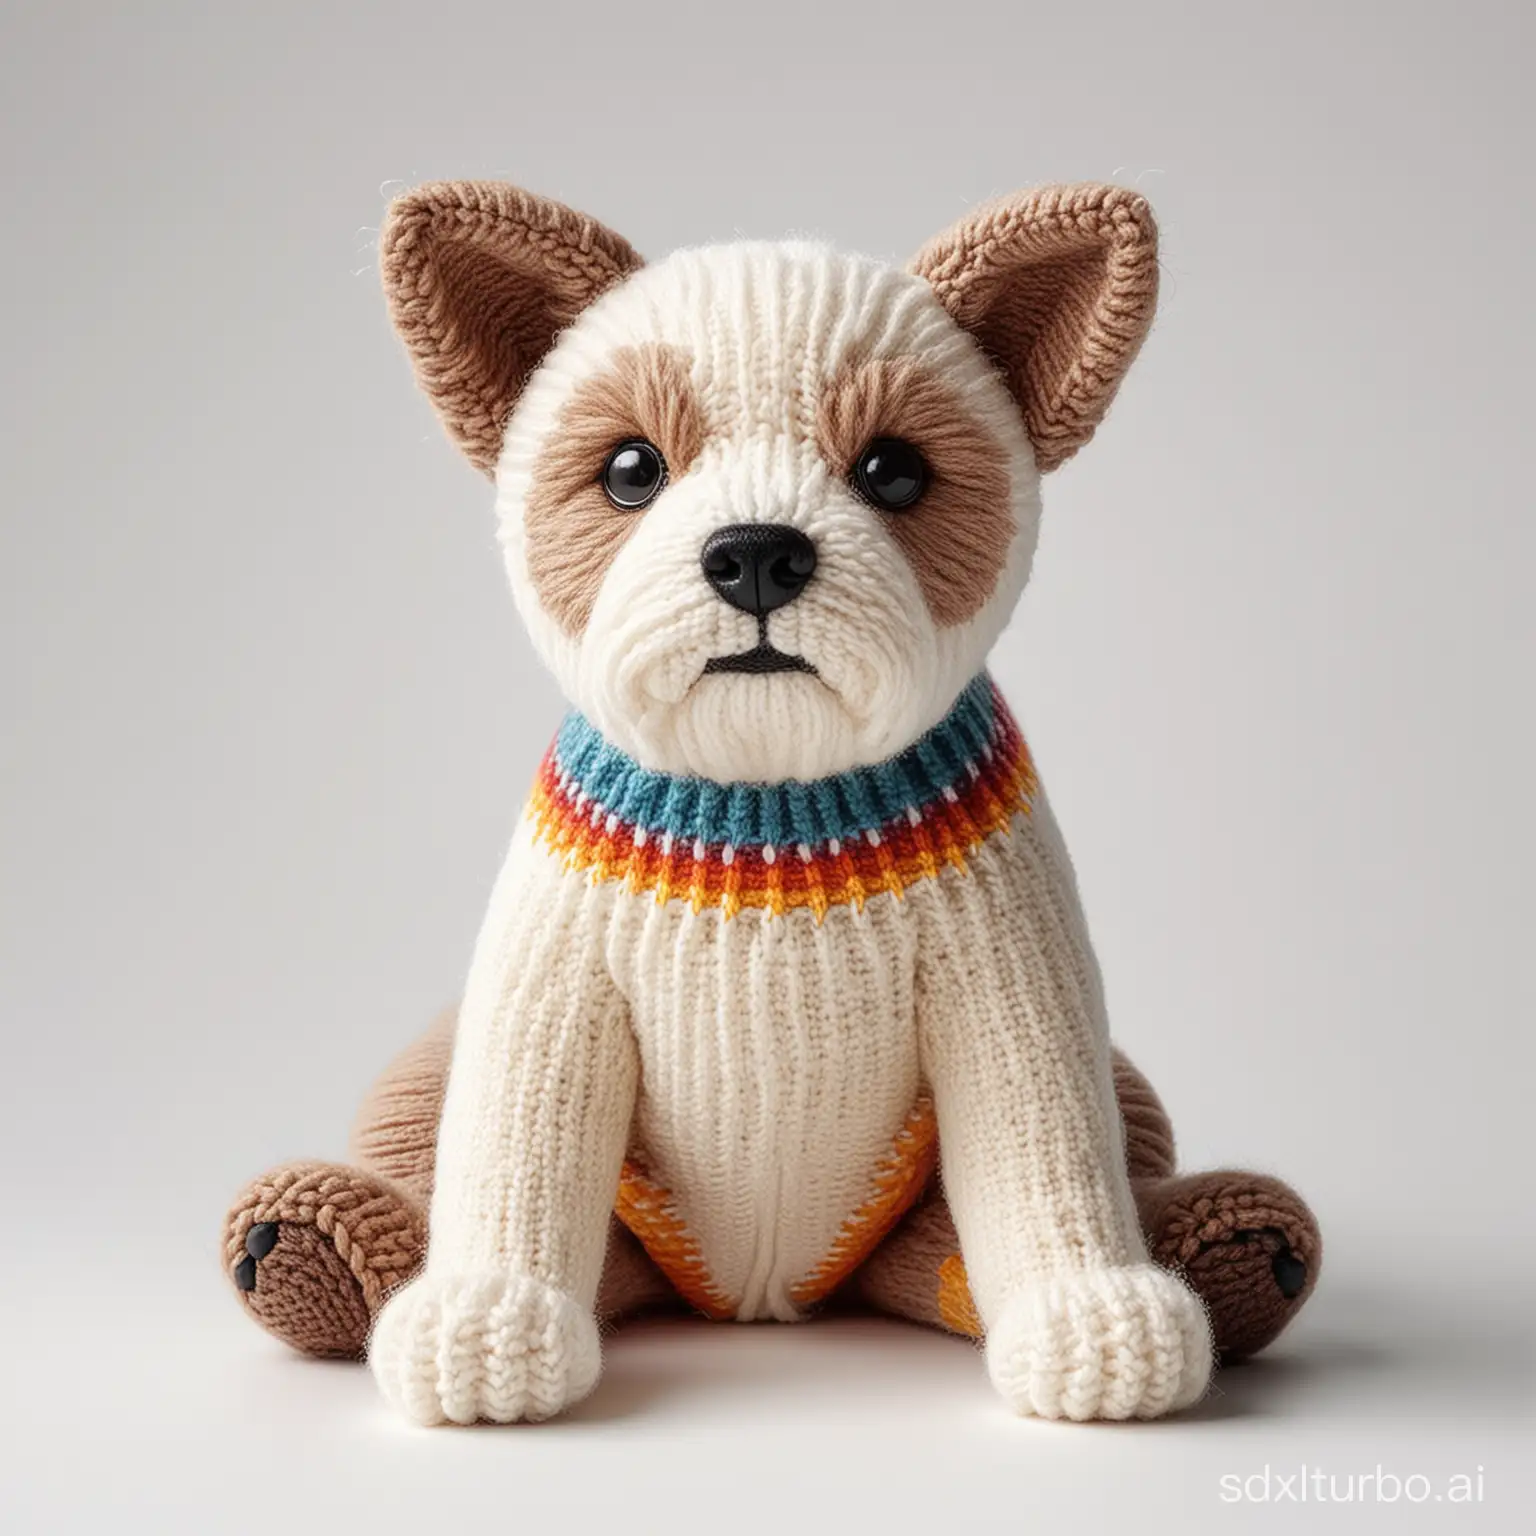 Colorful-Realistic-Knitted-Dog-Product-Photography-on-White-Background